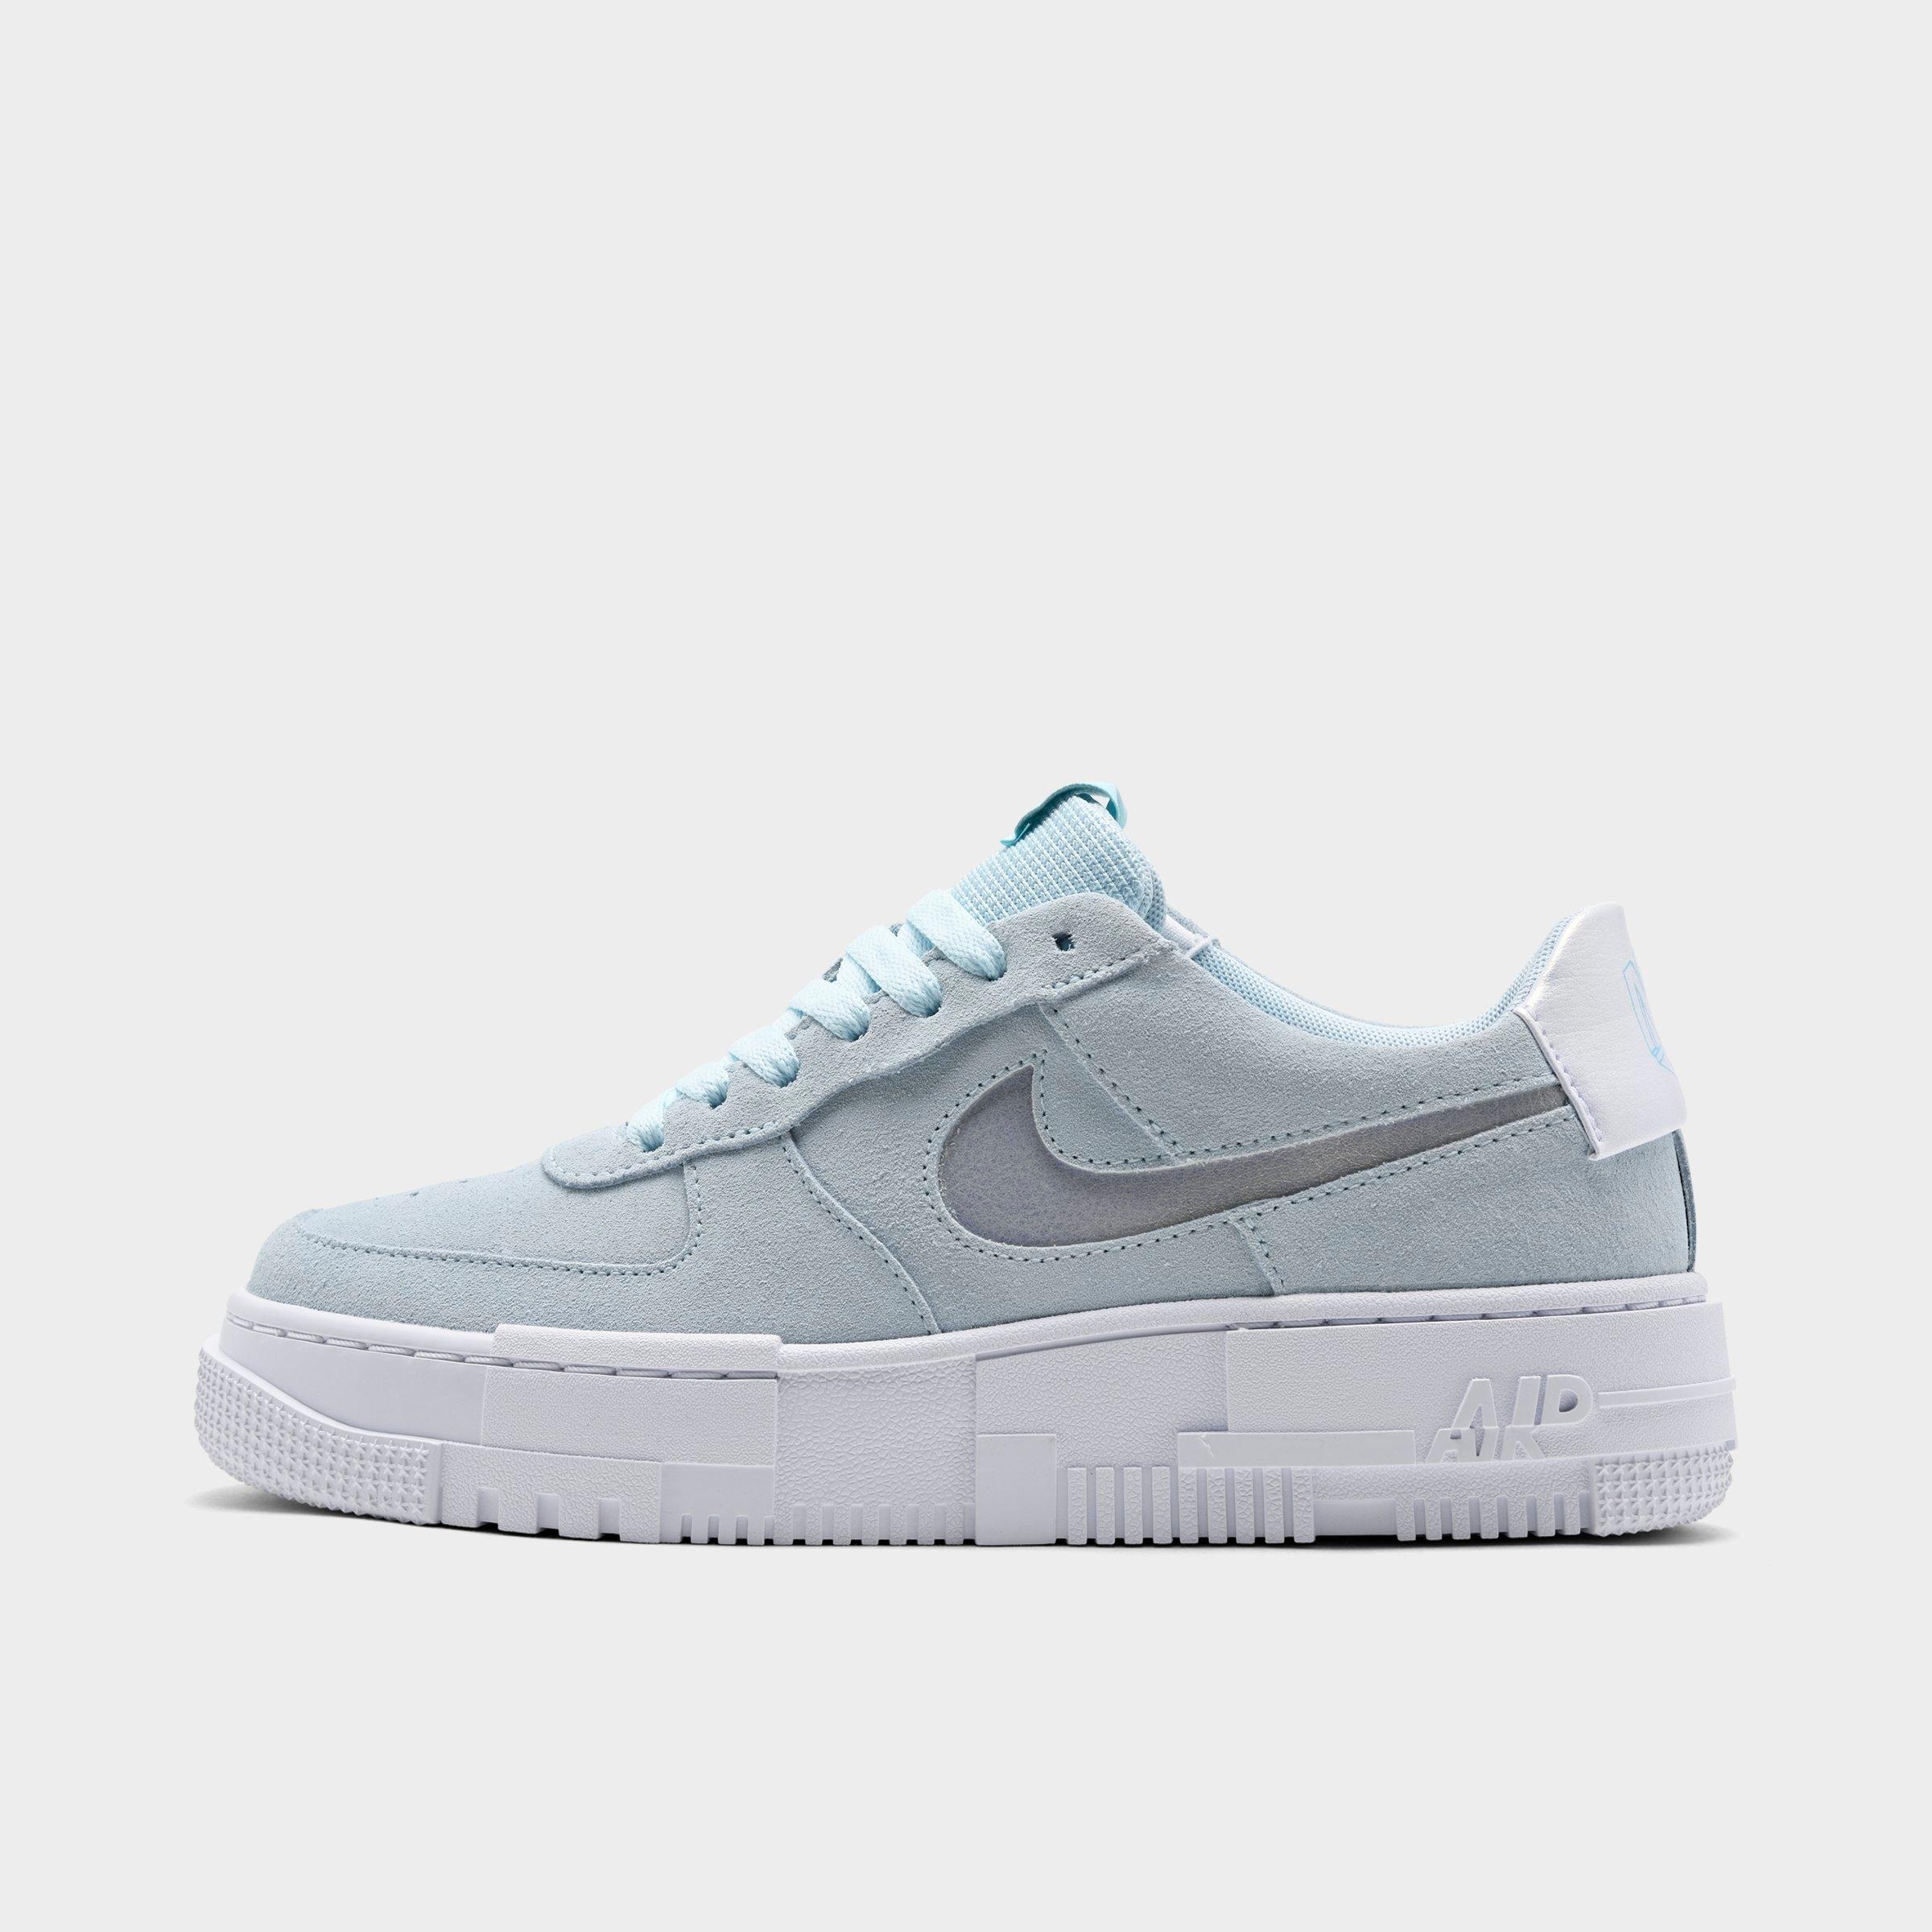 air force 1 afterpay